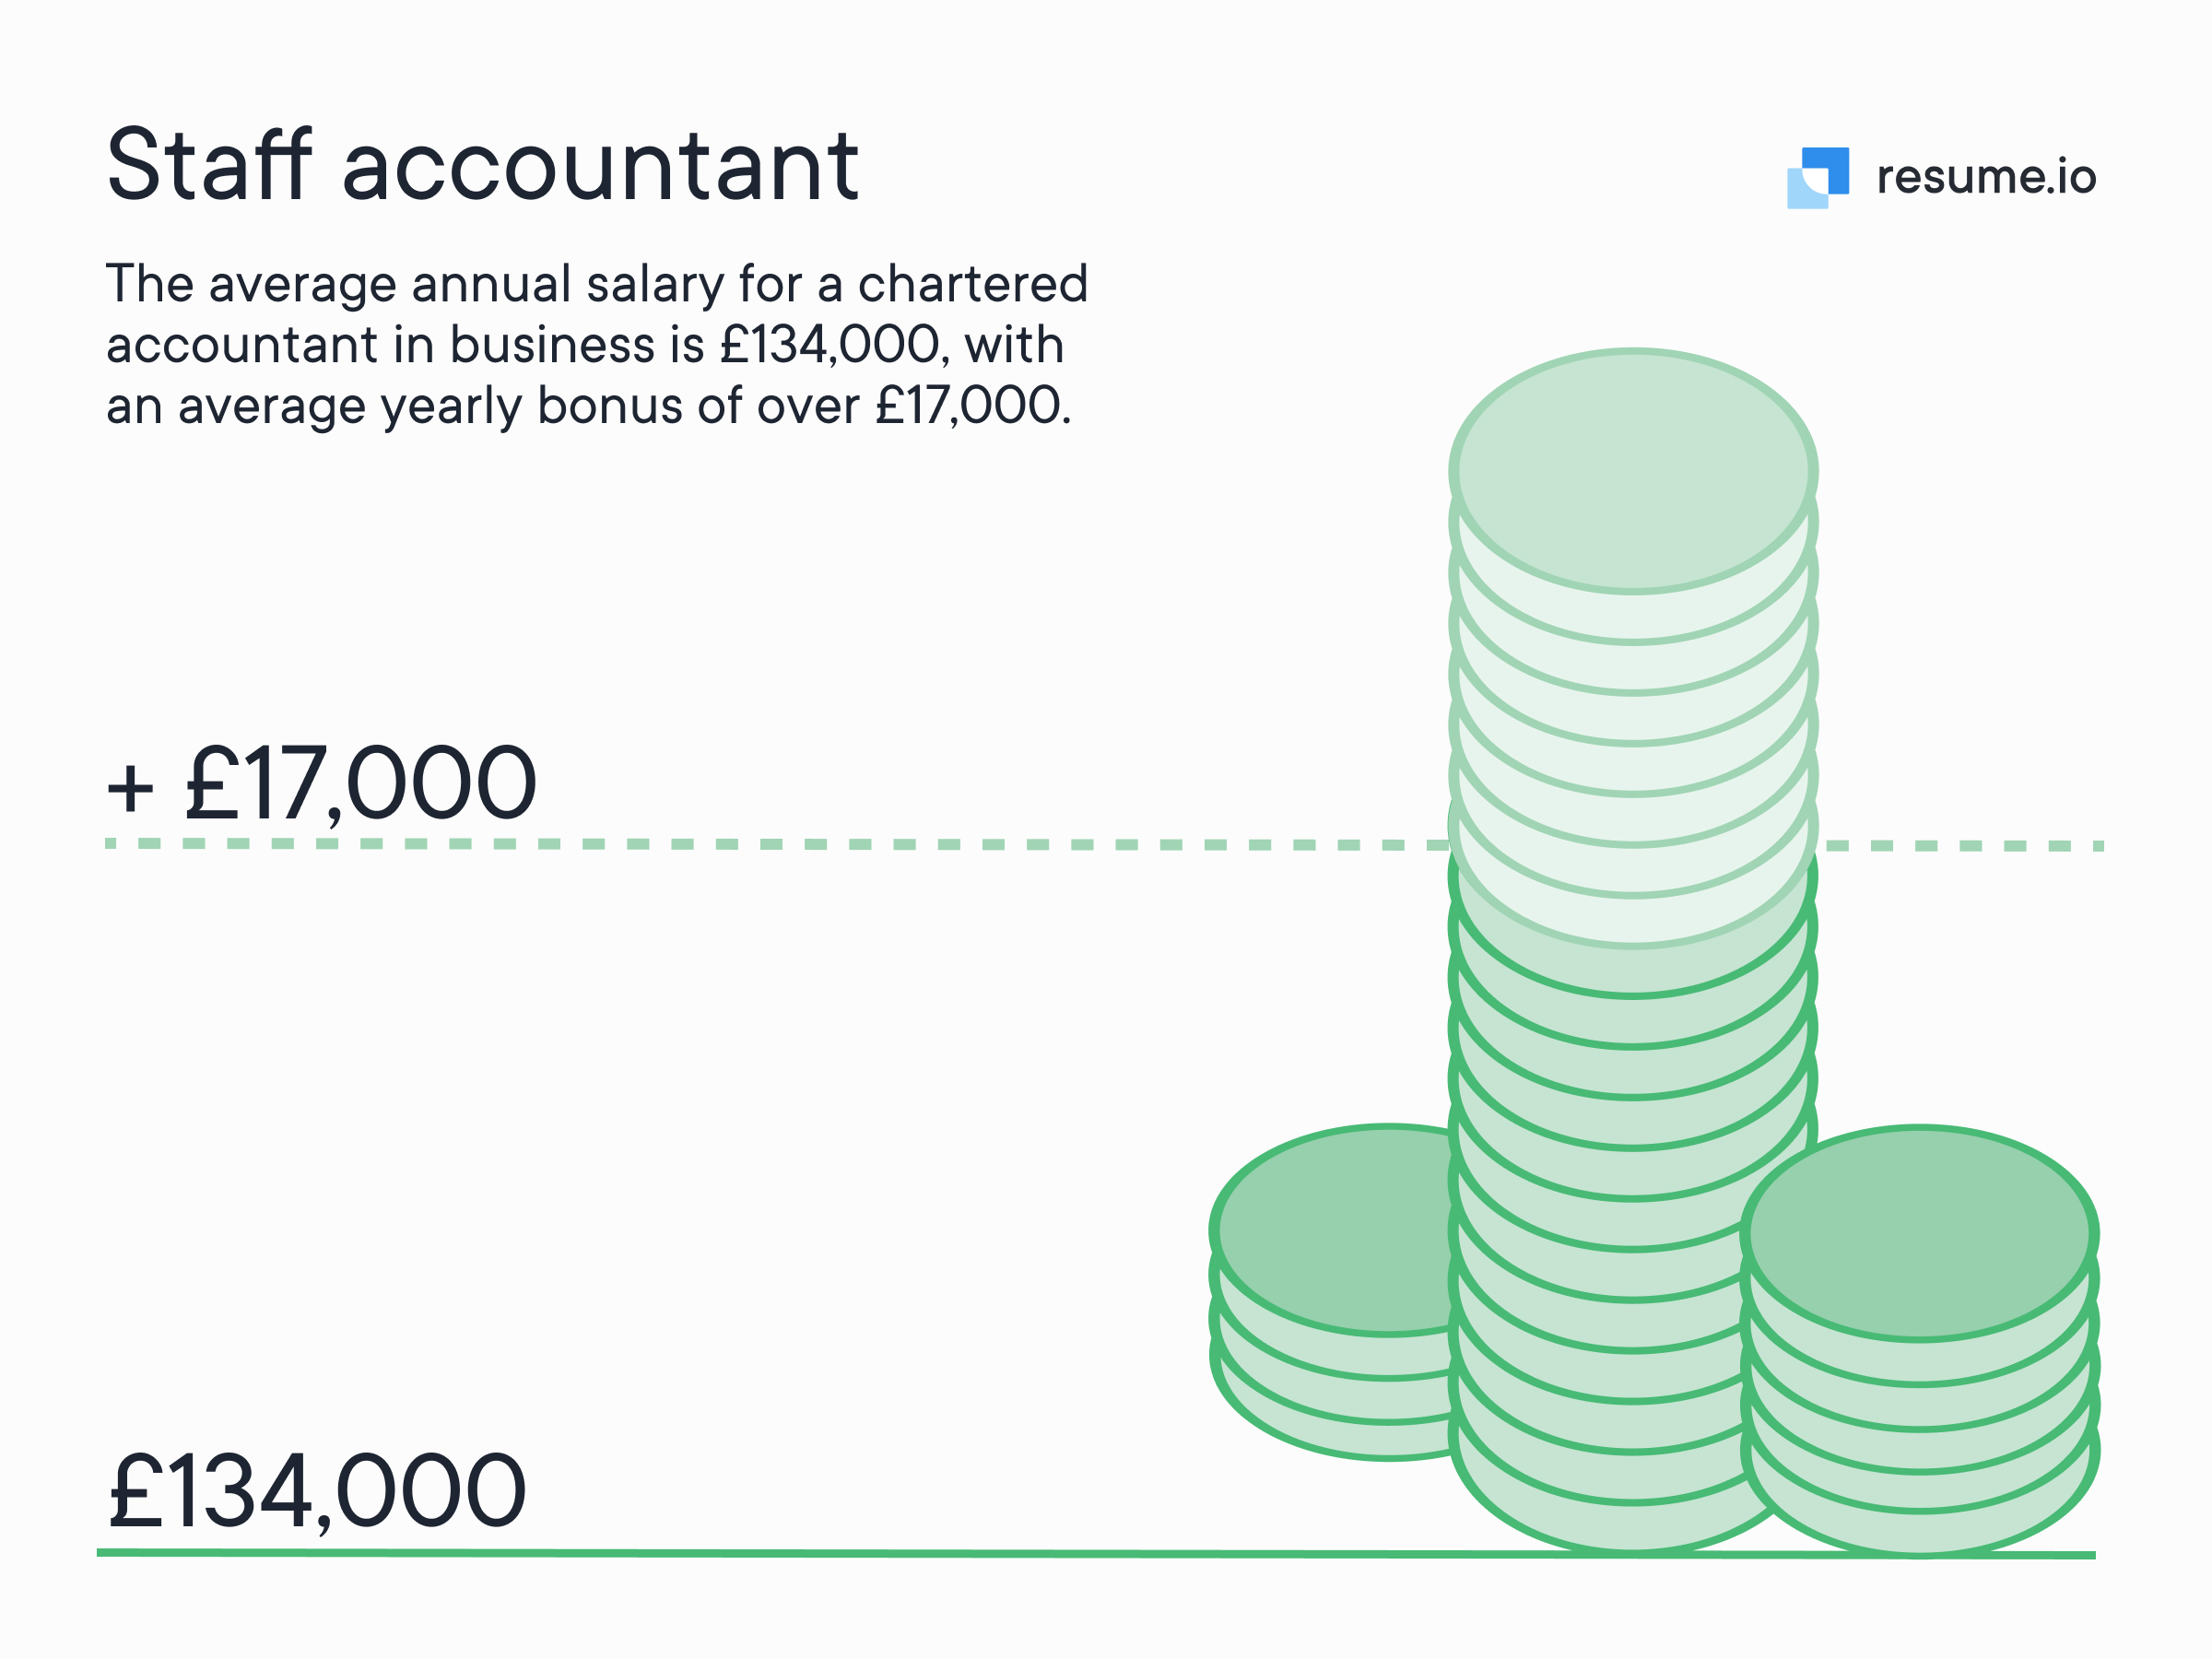 Average salary and yearly bonus for a staff accountant